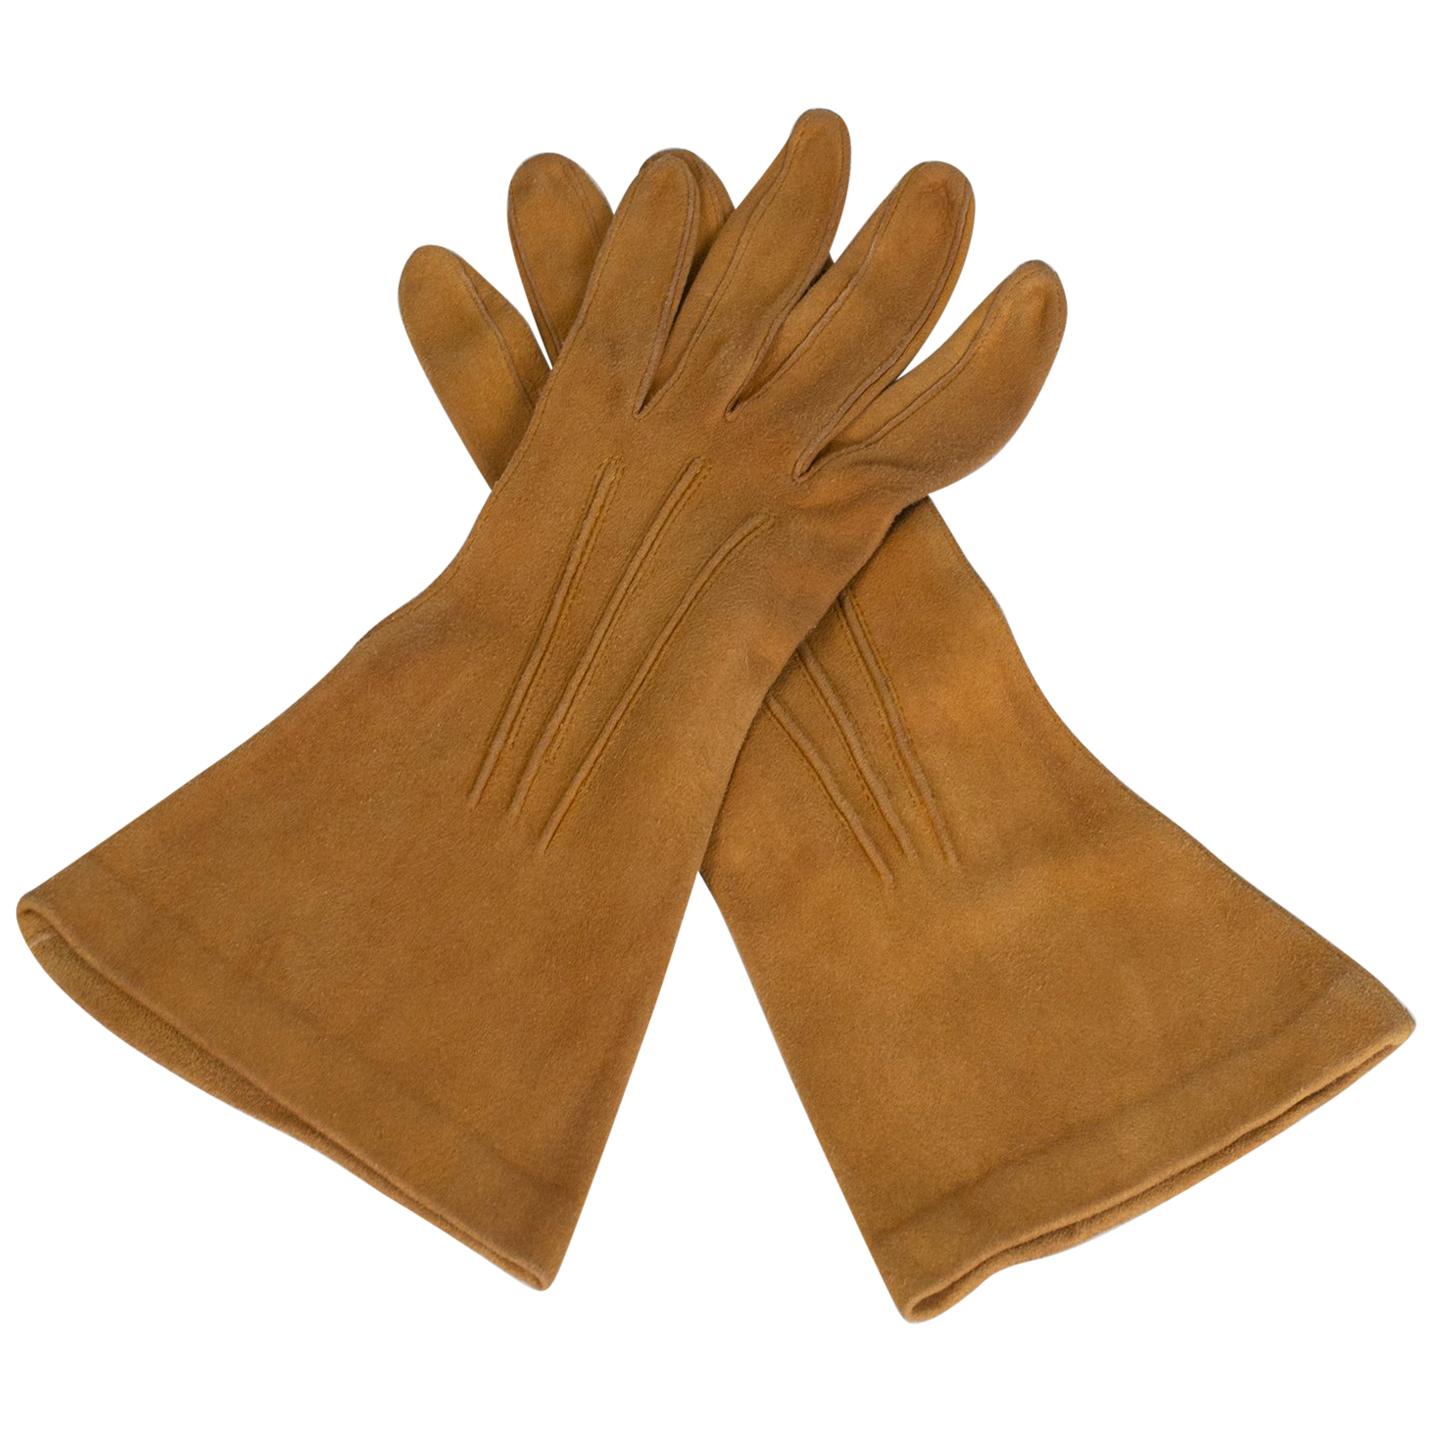 Saddle Tan Suede Three-Point Flared Gauntlet Forearm Gloves, France - S, 1960s For Sale